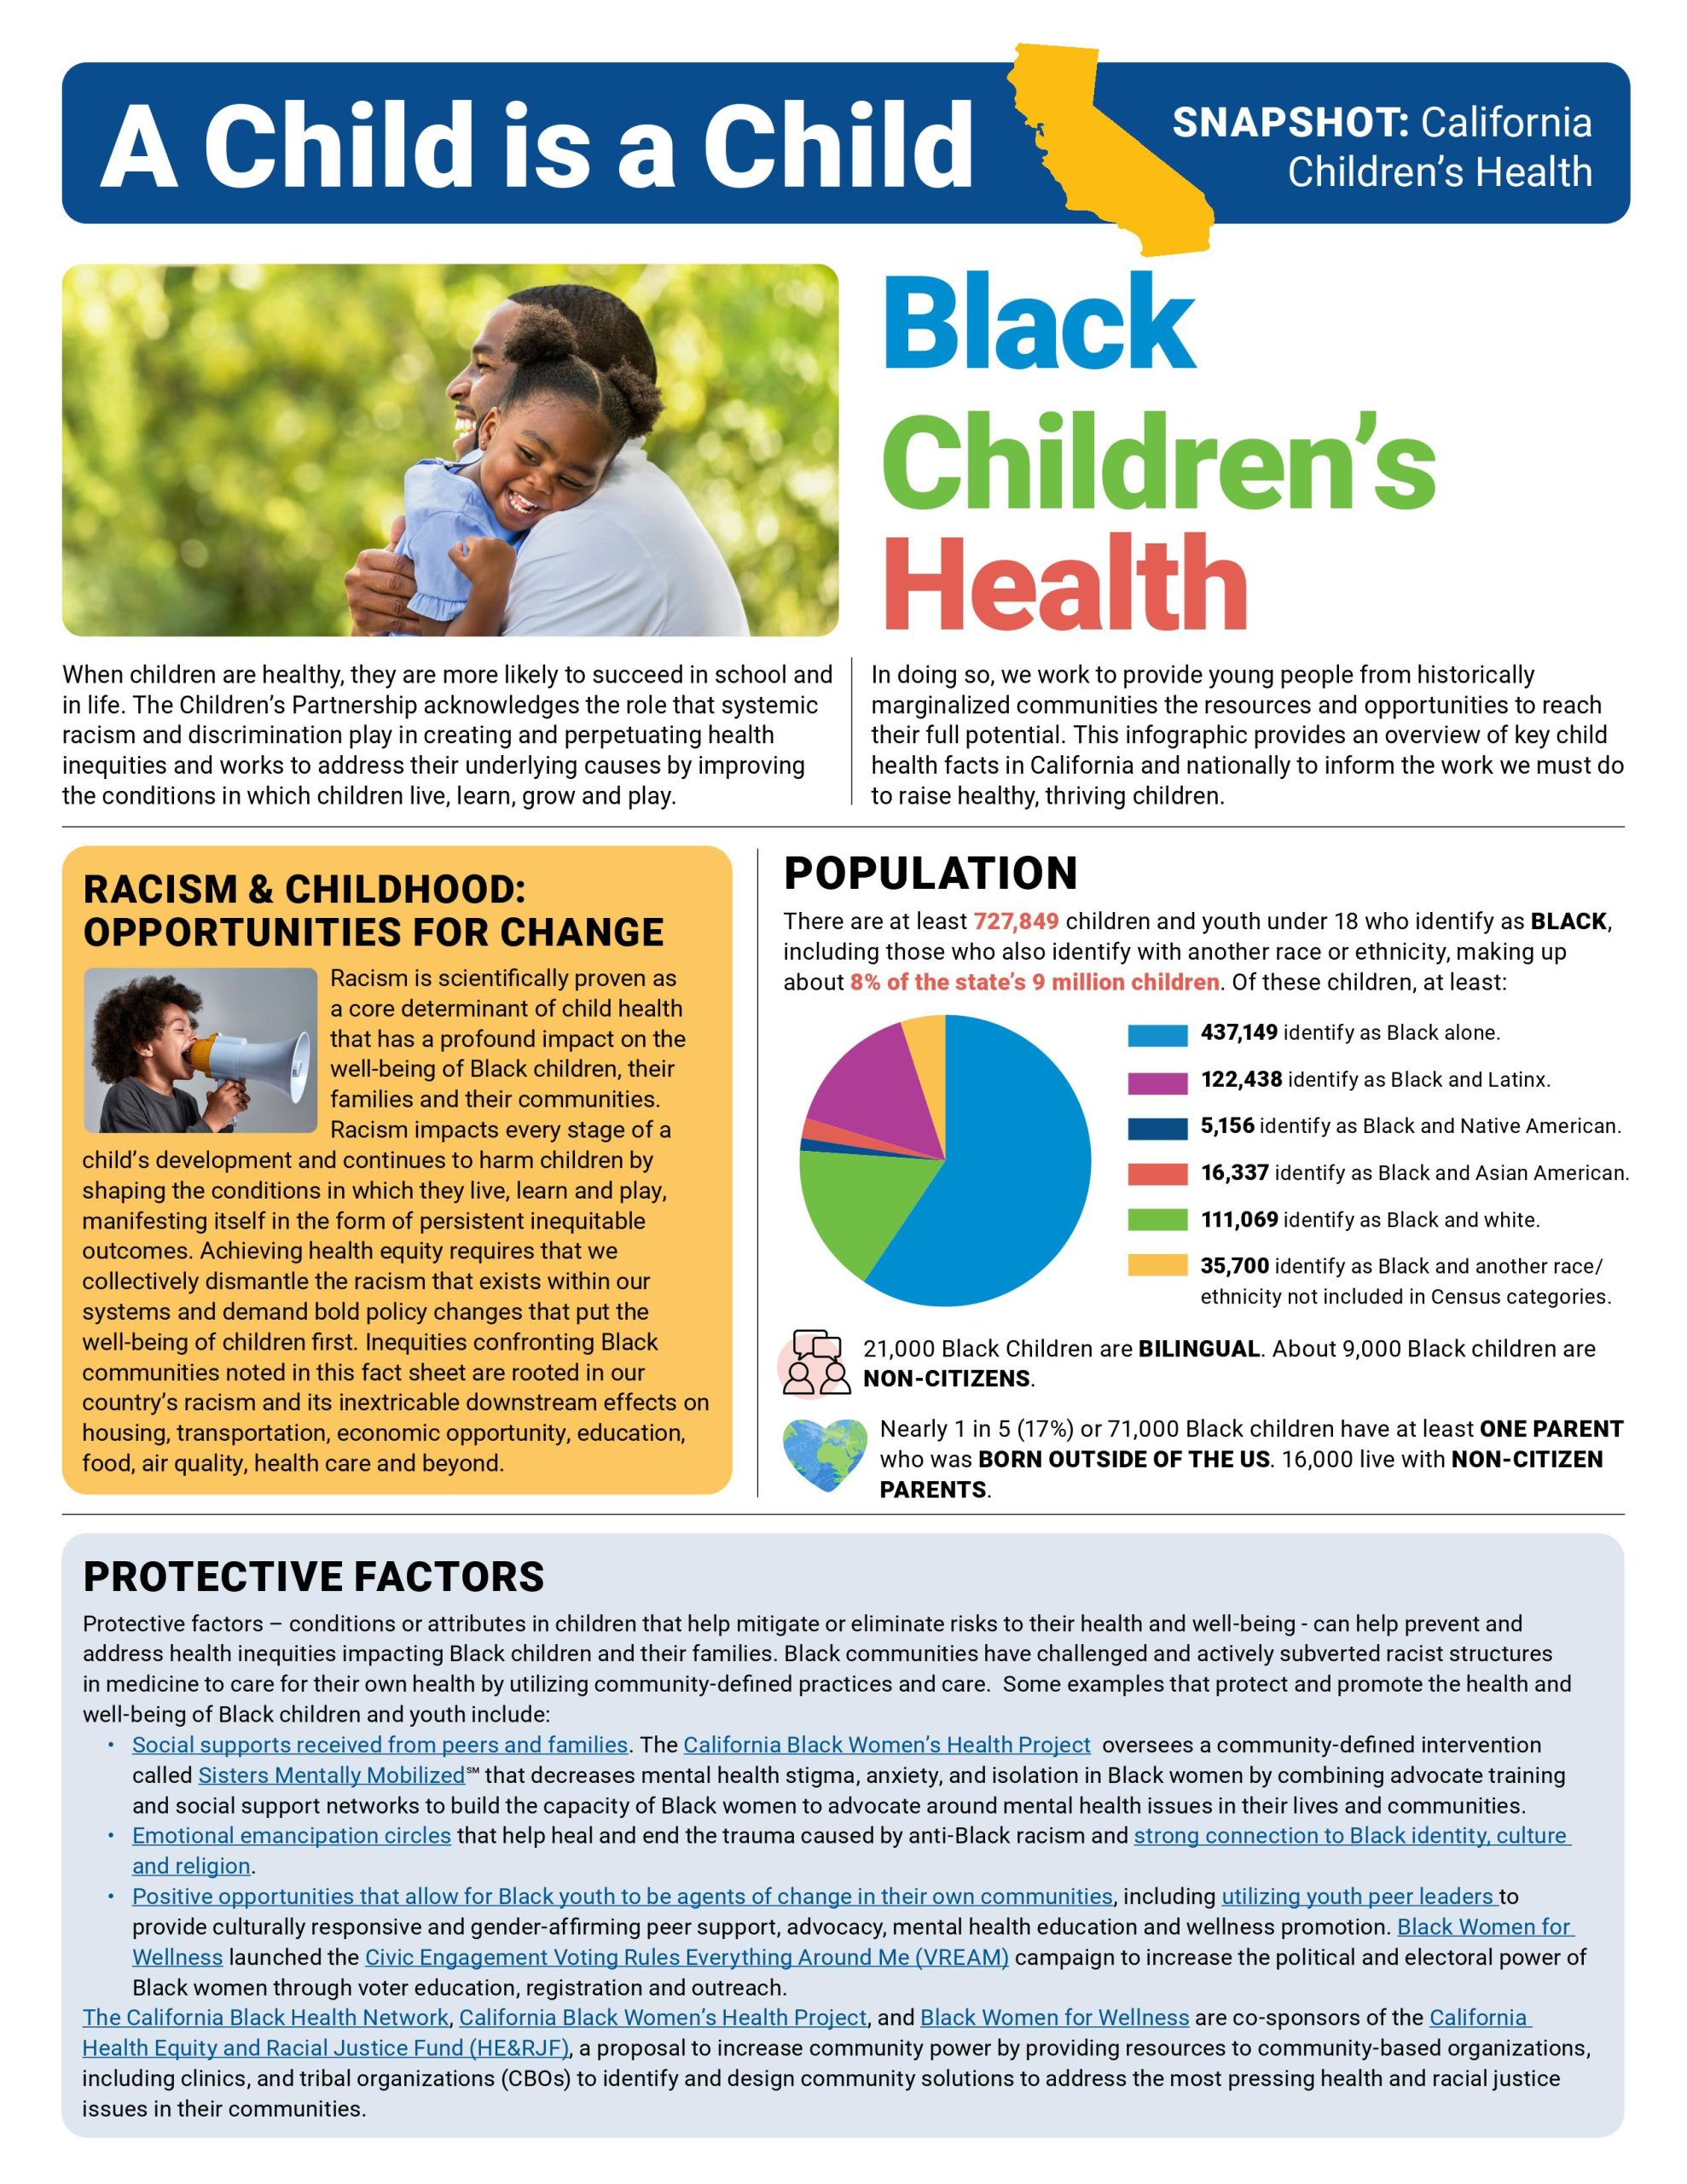 A Child is a Child: A Snapshot of Children's Health in California - The  Children's Partnership